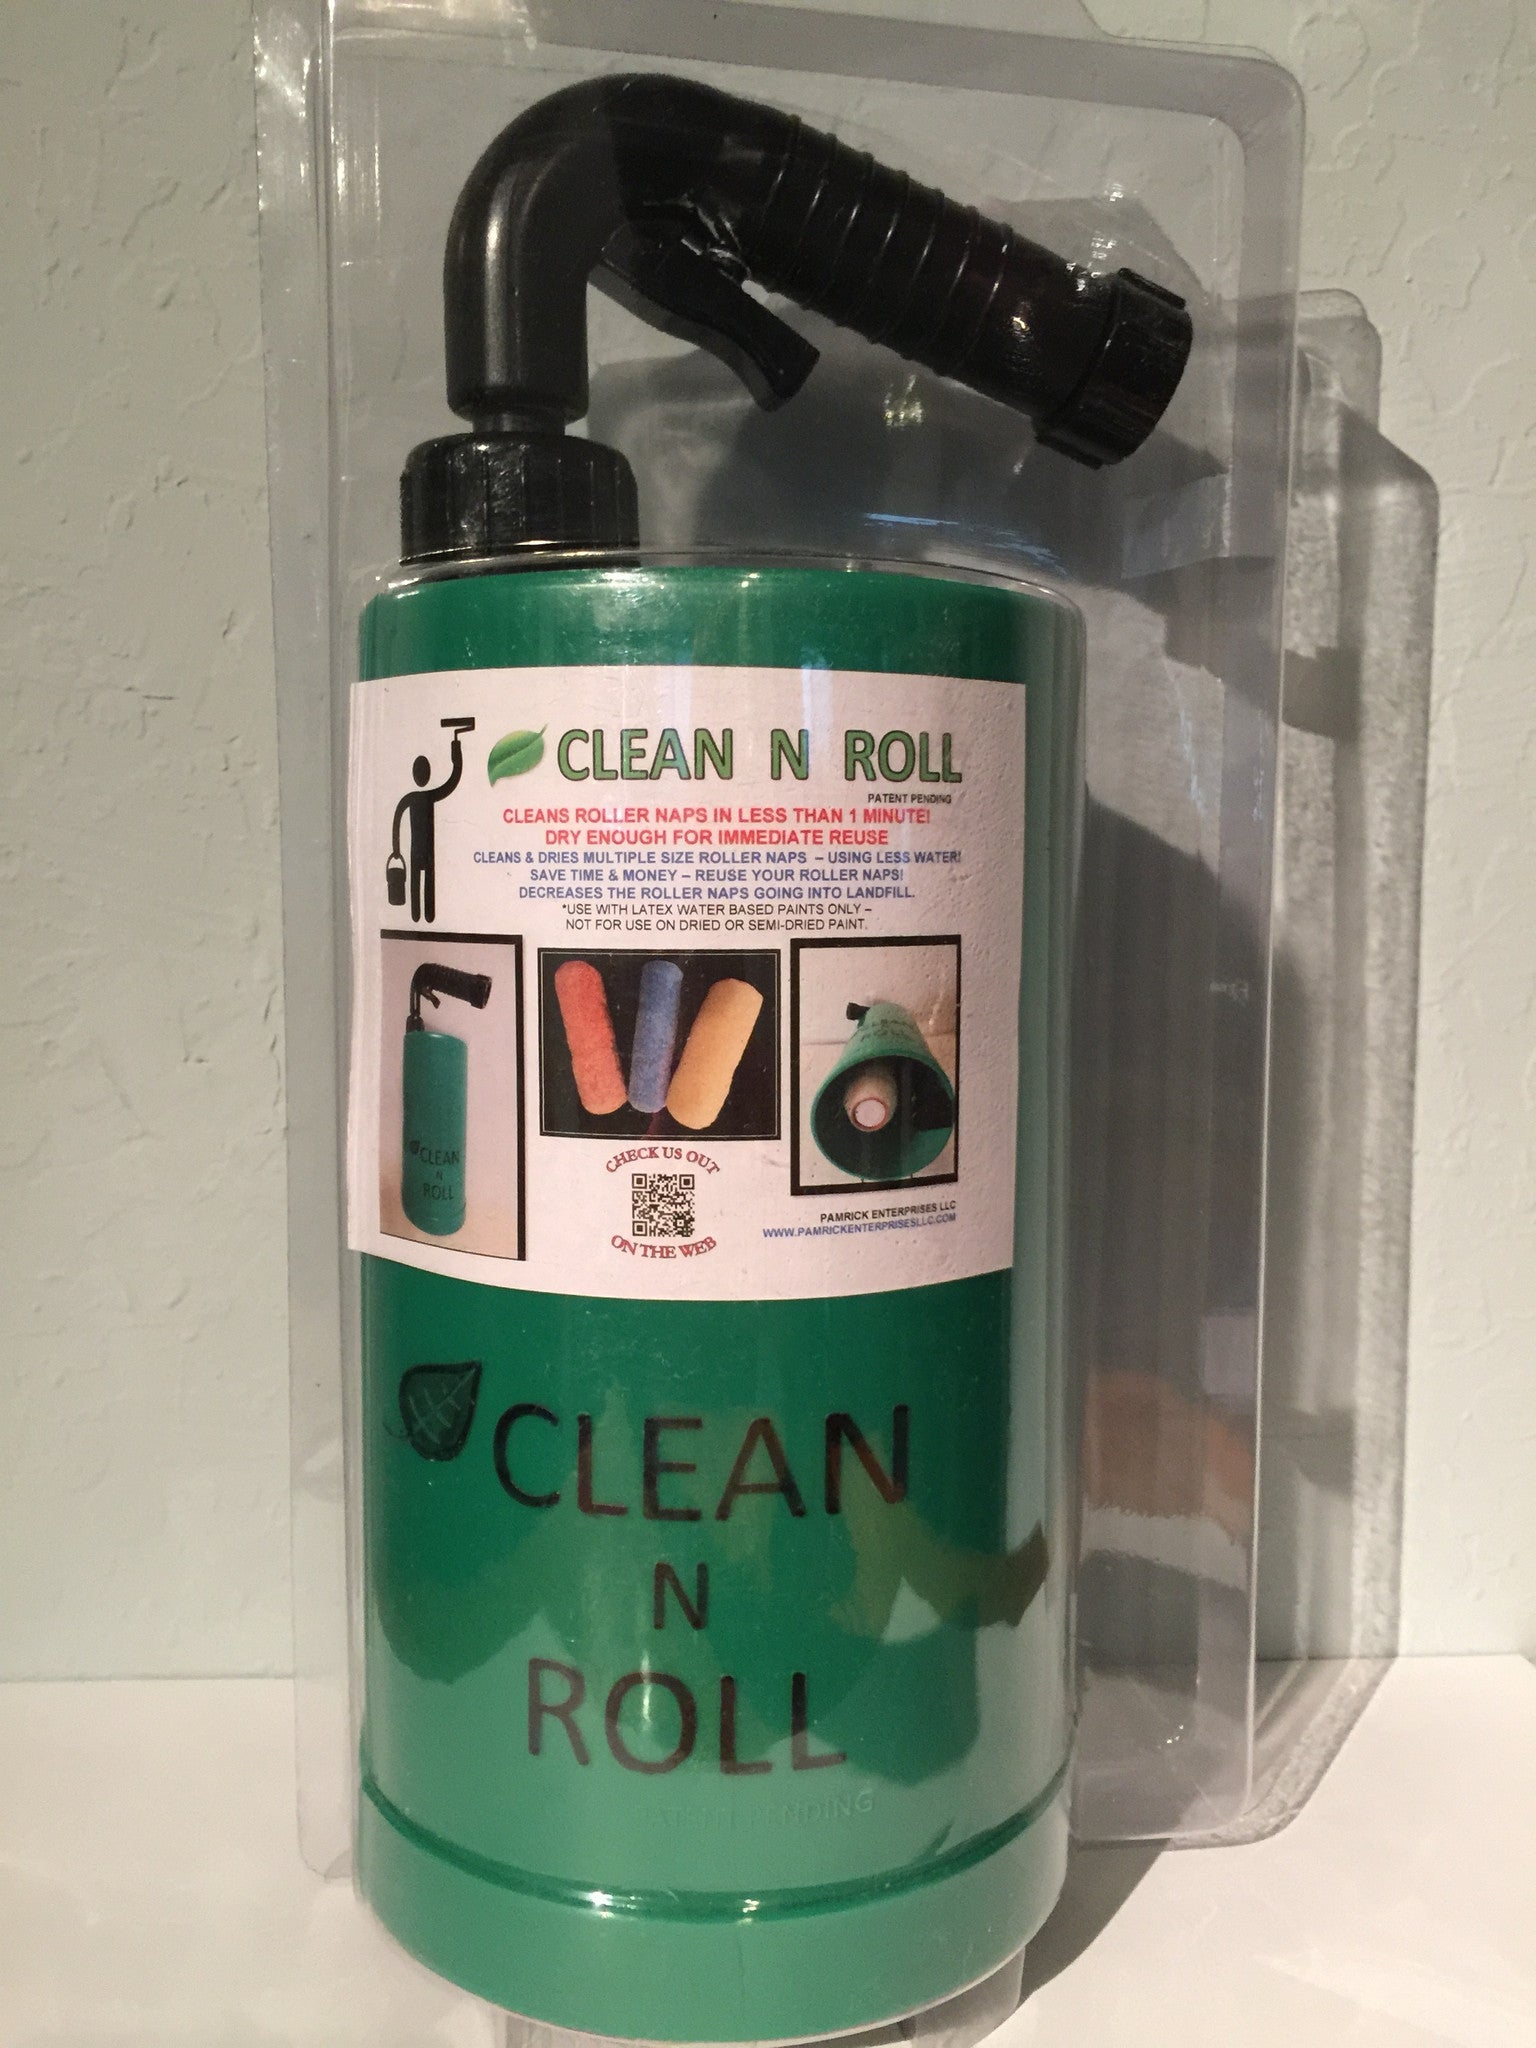 Wash A Roller paint roller cleaner, cleans rollers in 30-90